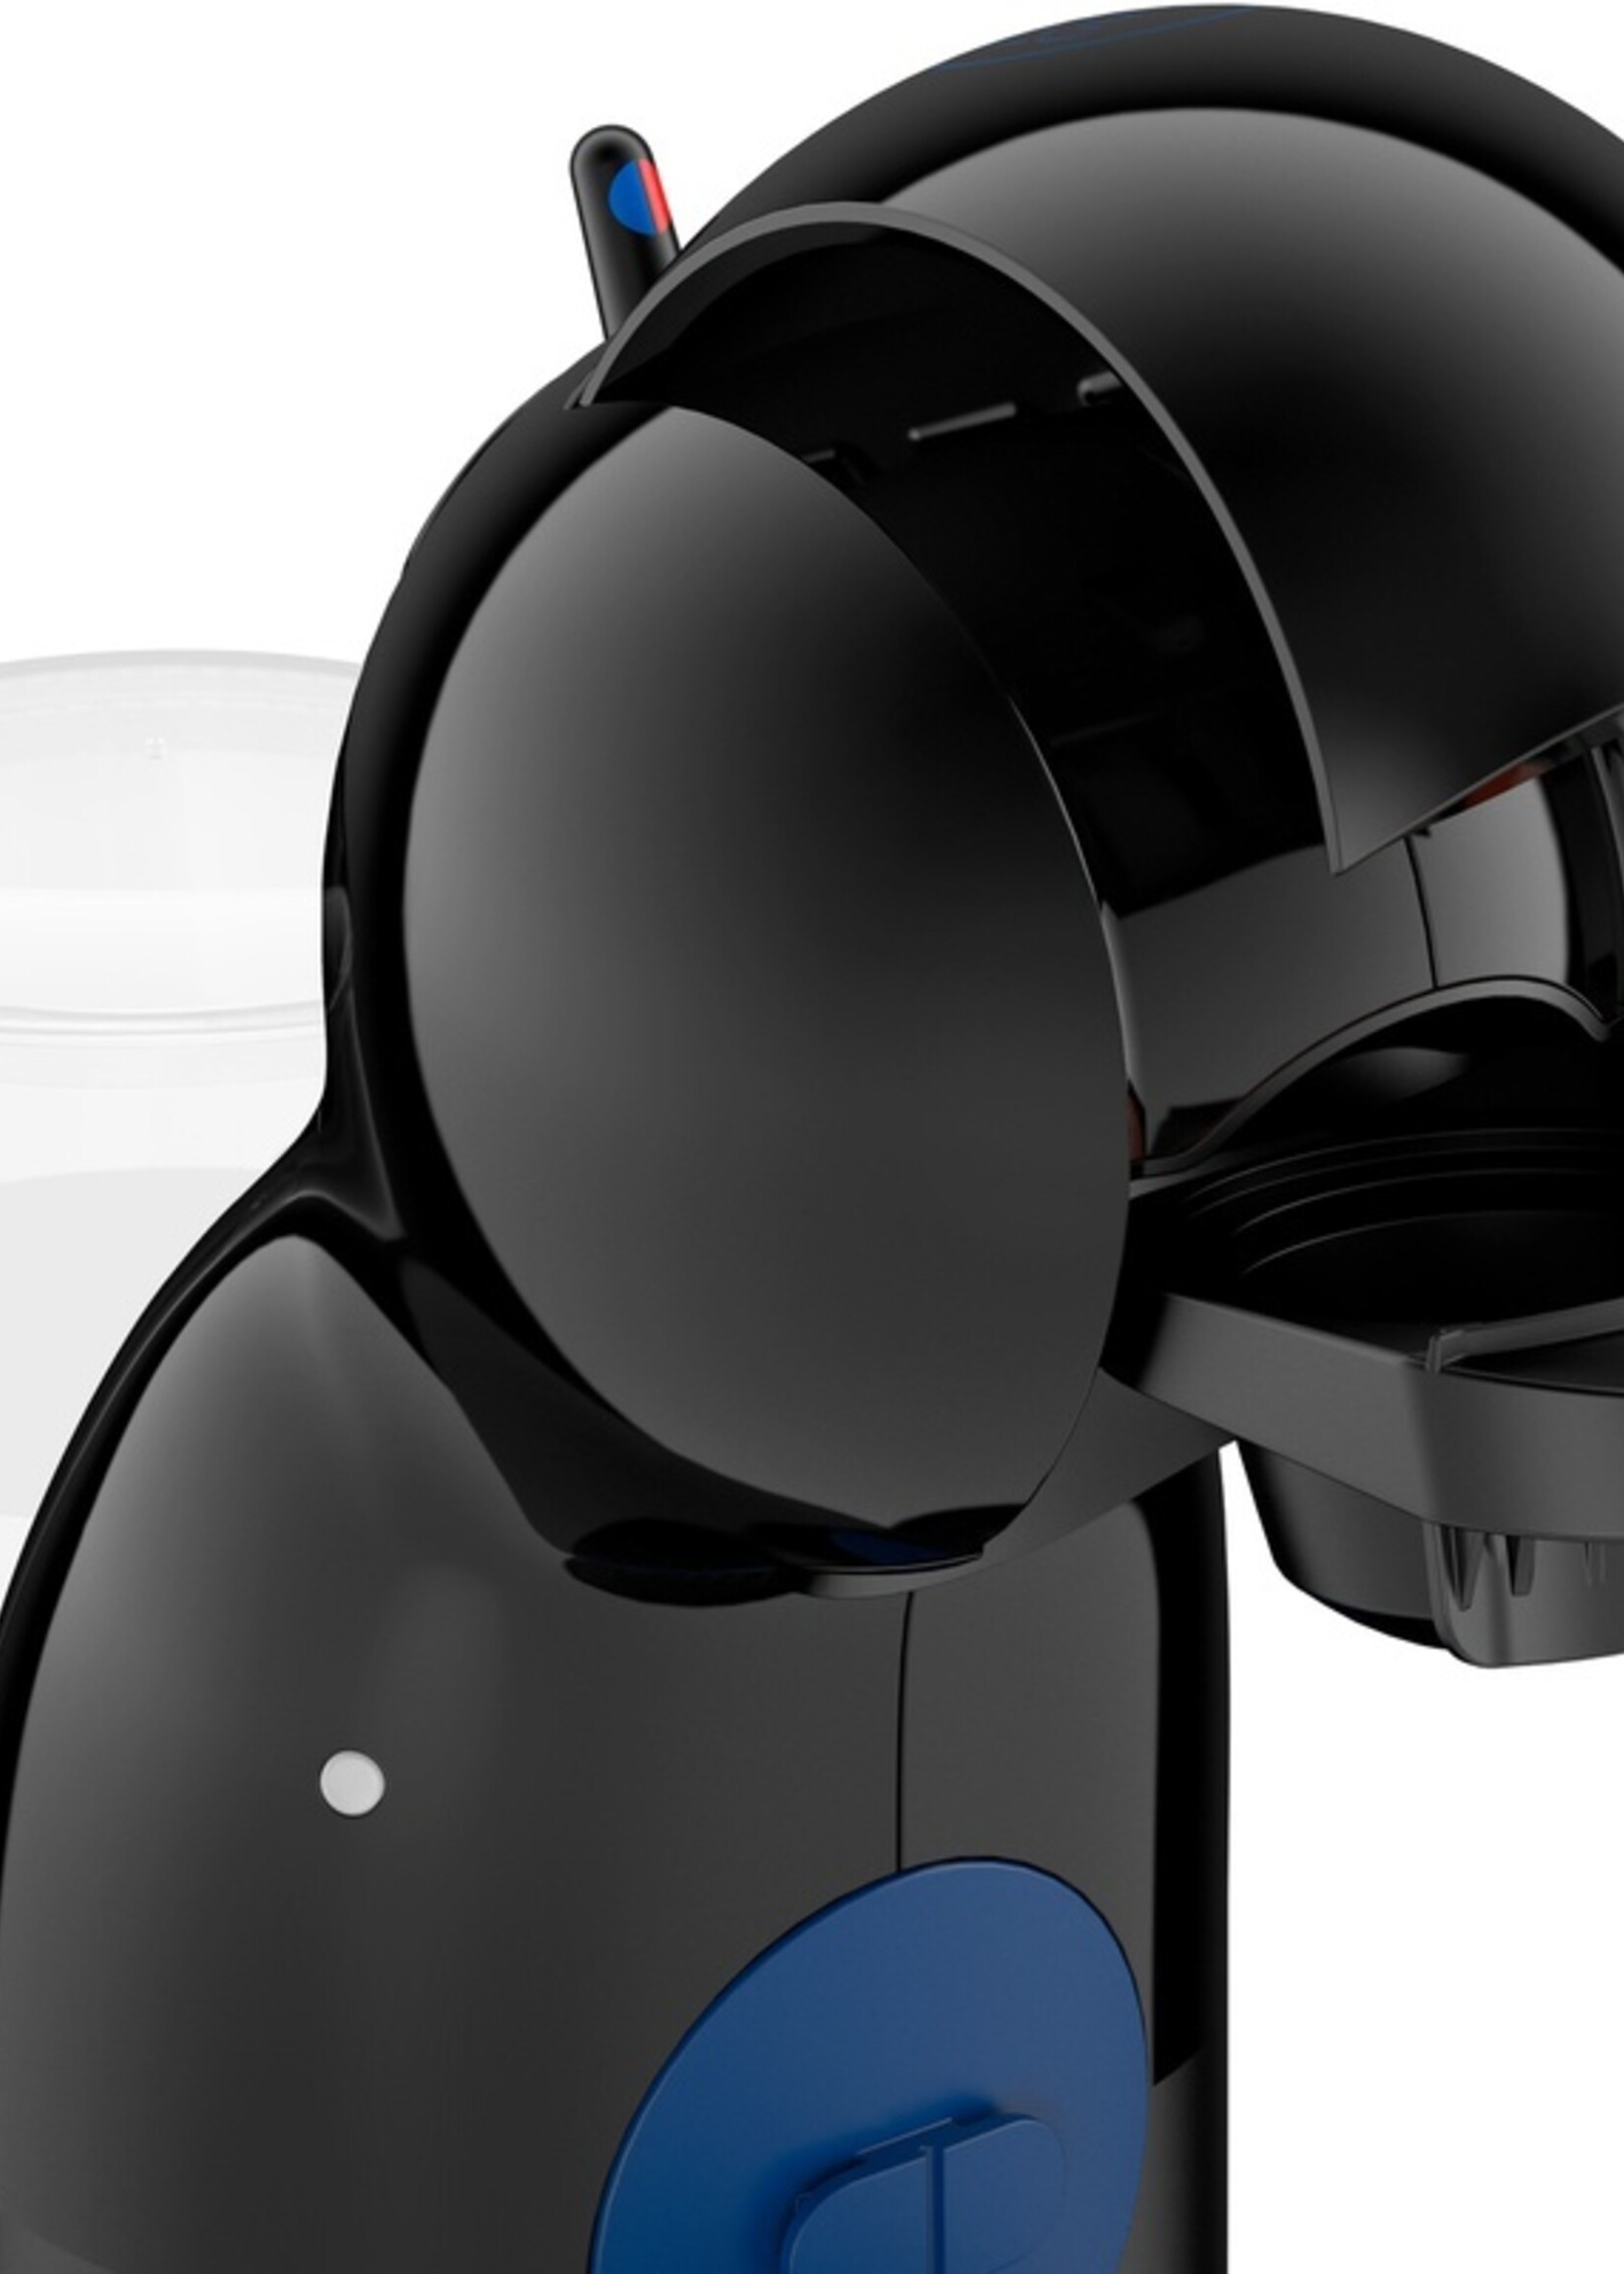 Krups Dolce Gusto XS KP1A08 - Koffiemachine